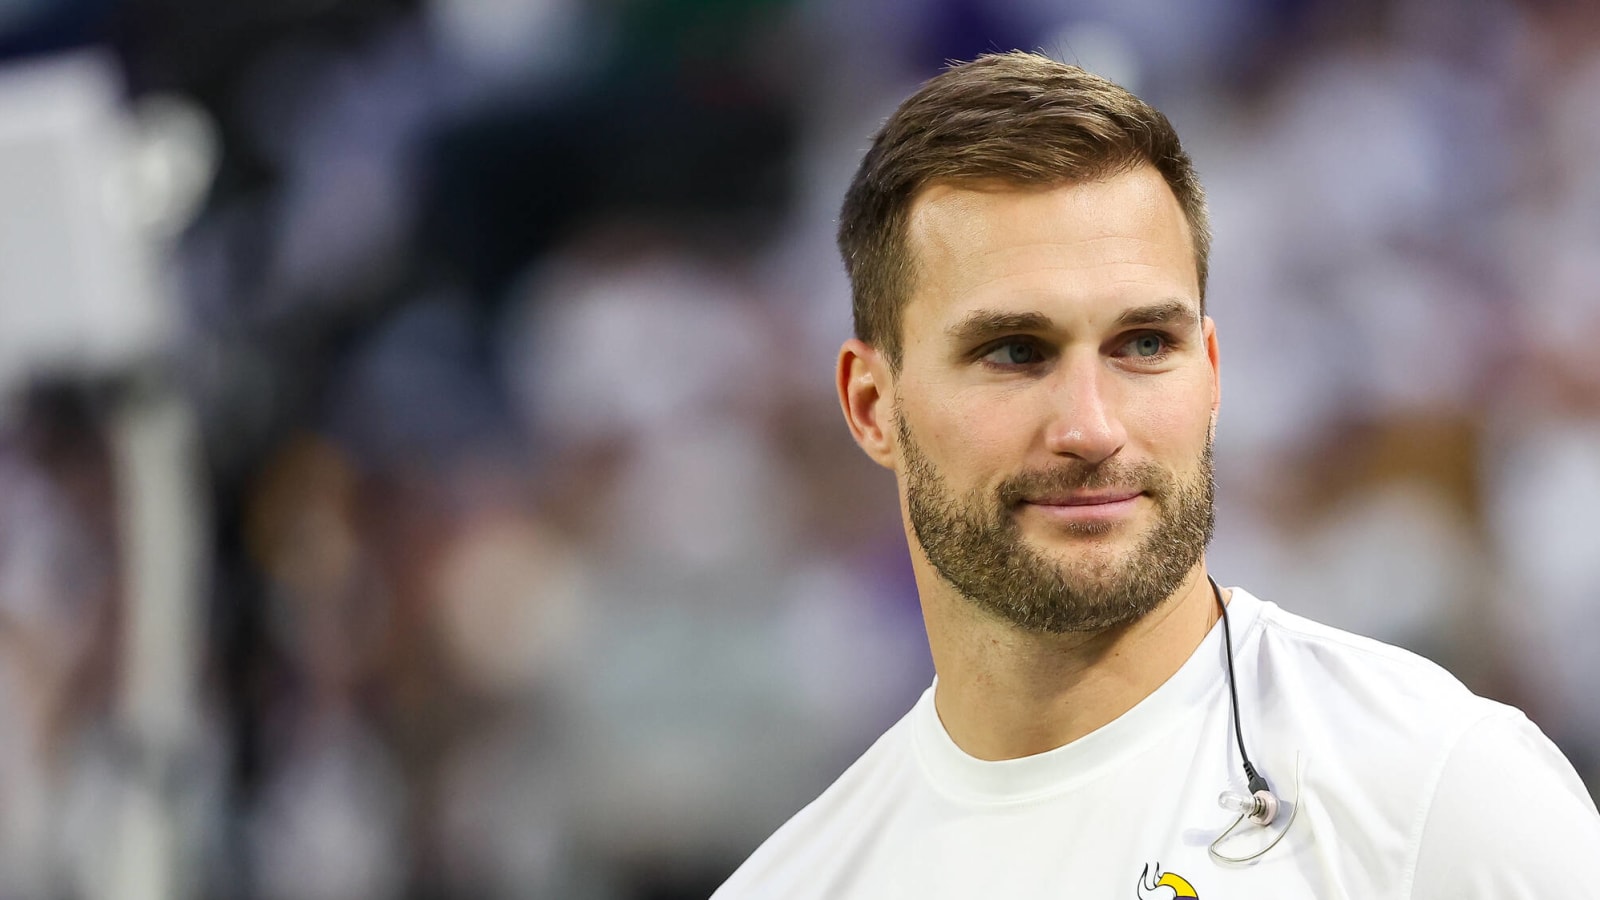 Kirk Cousins has telling response to Falcons’ draft decision